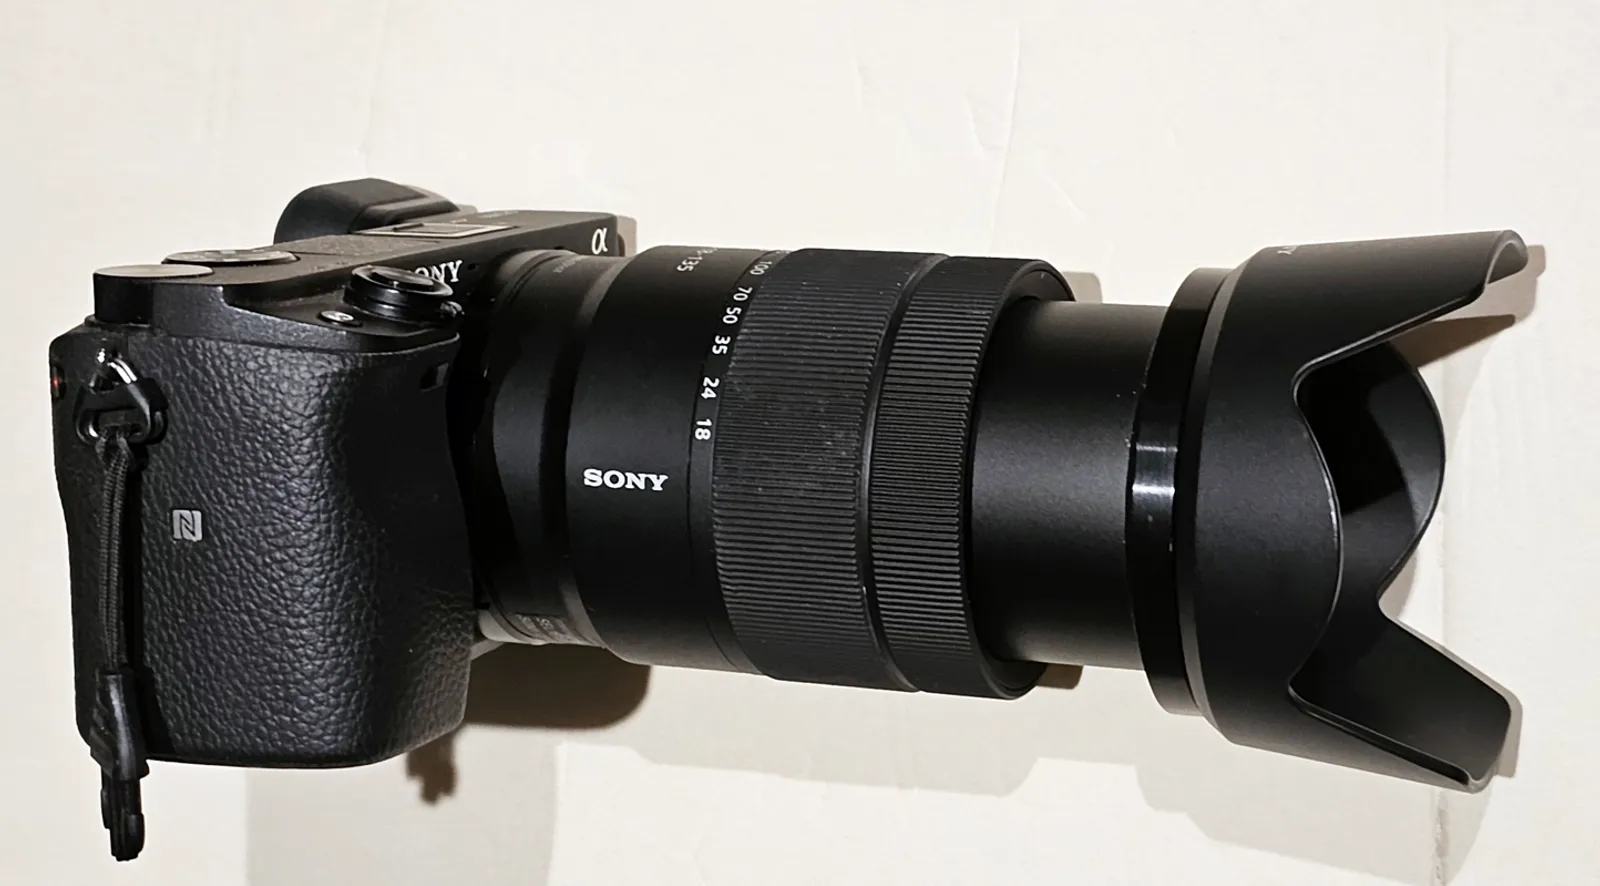 Sony a6400 with 18-135mm Lens From Kelly's Gear Shop On Gear Focus